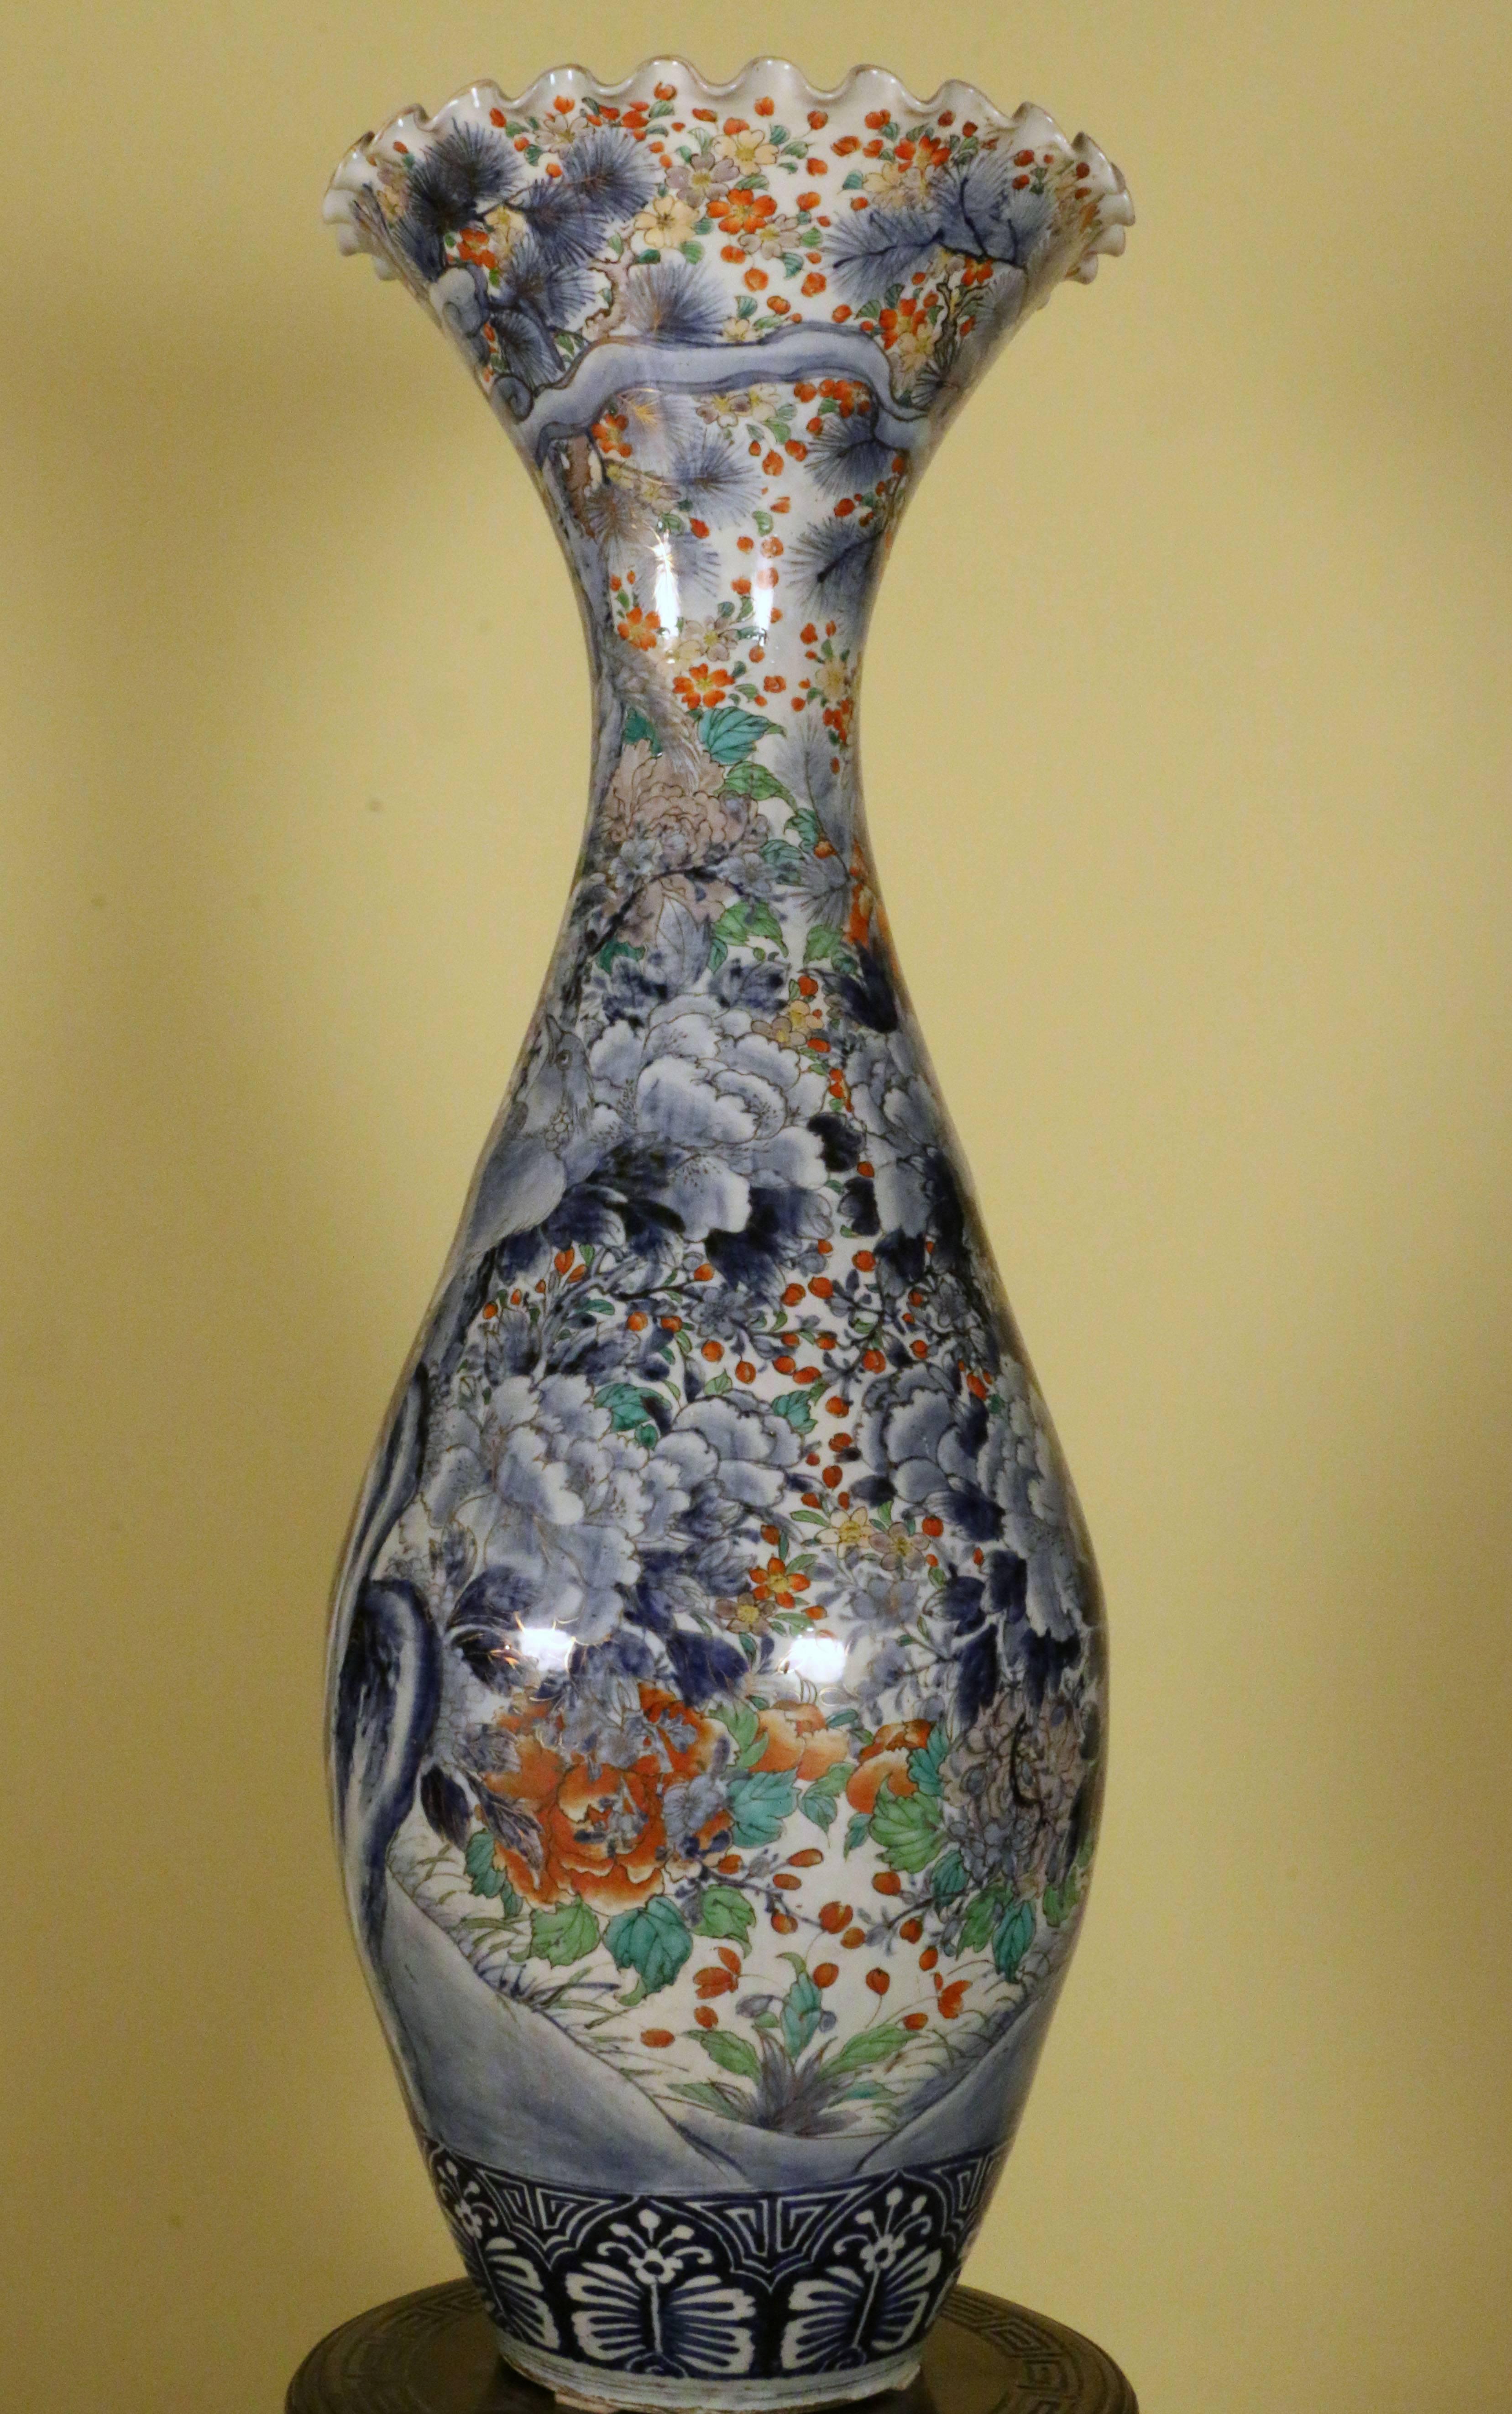 This vase has great decorative impact; the ovoid body is painted in polychrome pallet with birds in a flowering landscape, centered on an old tree trunk. The decoration is profuse but well thought out, with two large birds perched on the trunk and